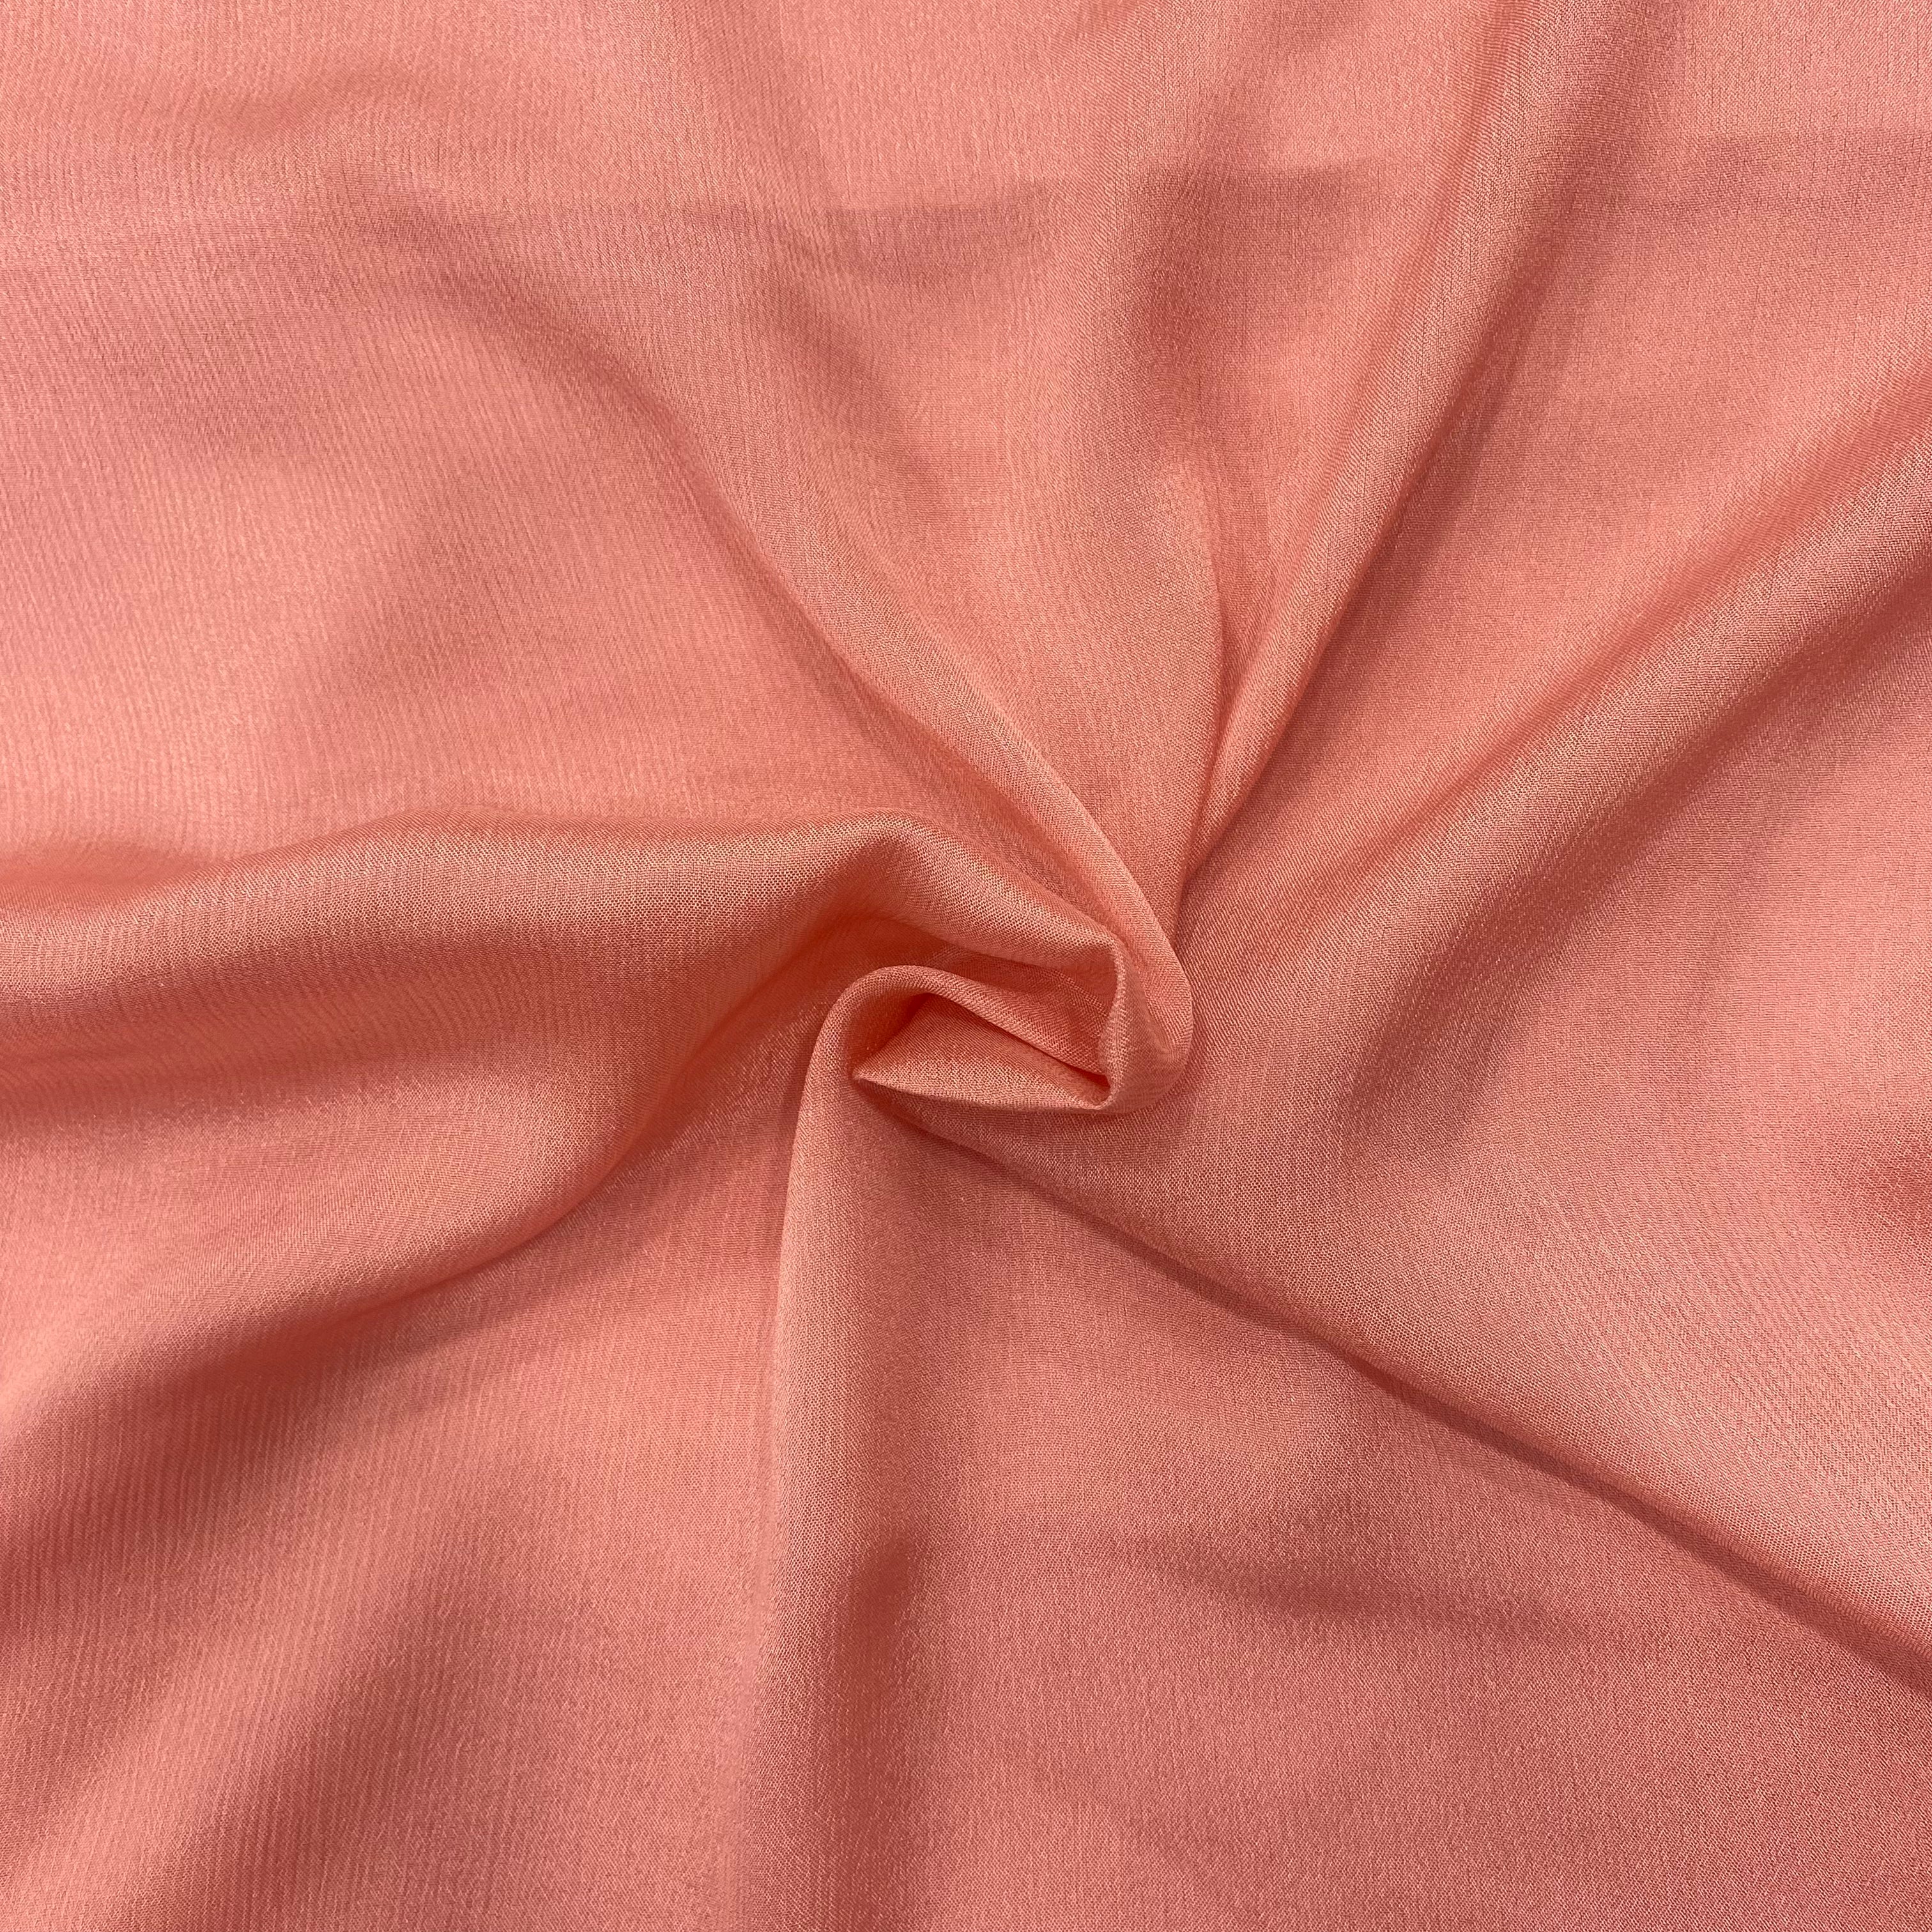 Detail shot of the Peach Pink Chinon texture, highlighting its fine quality